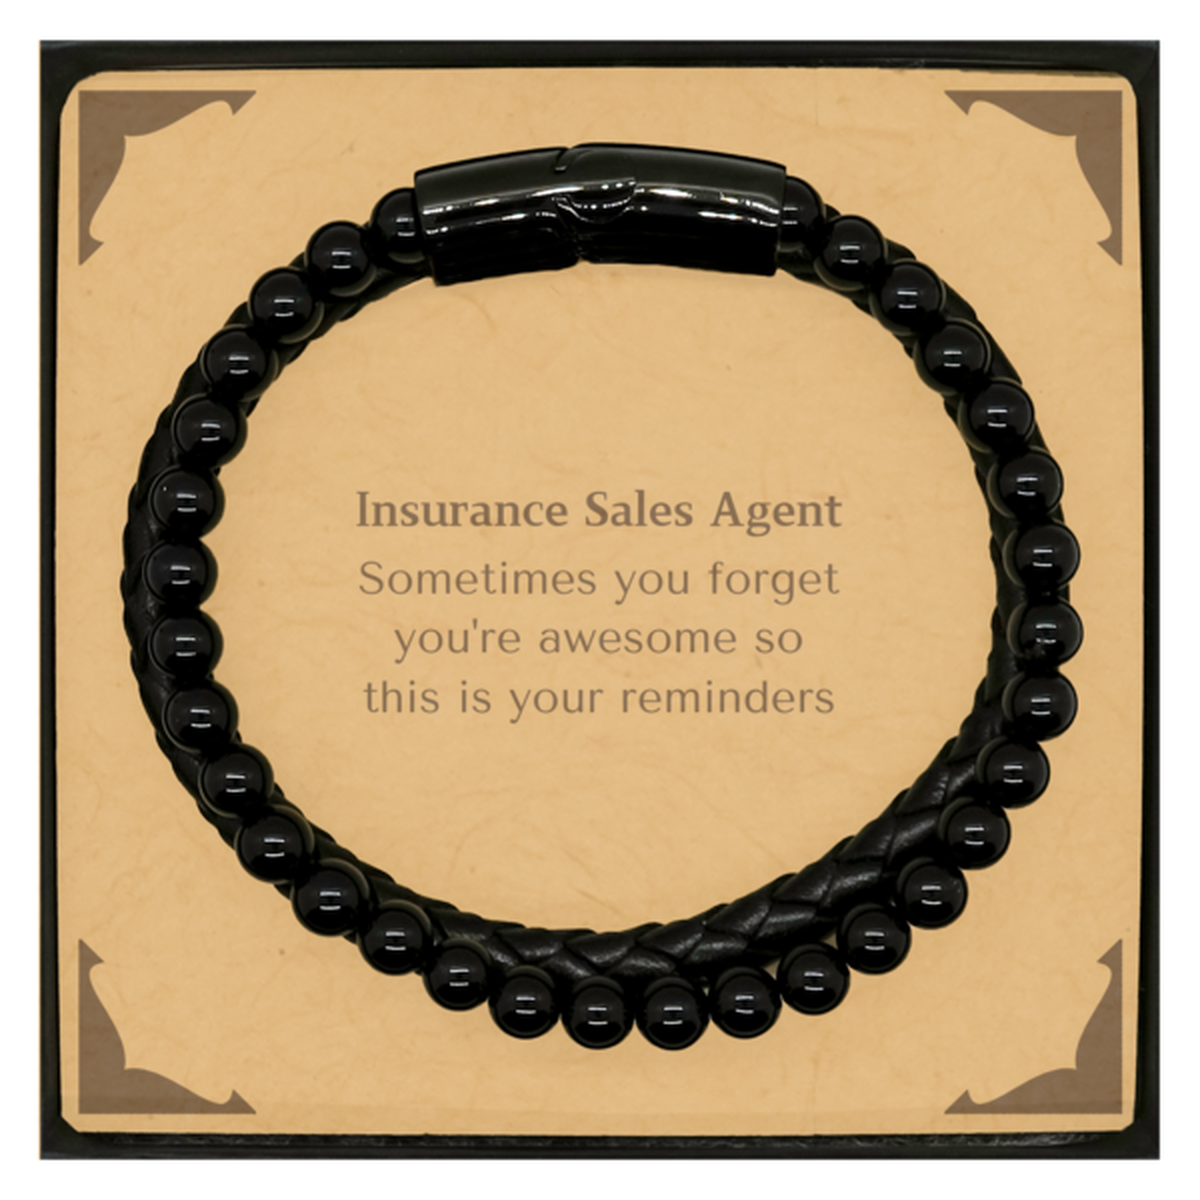 Sentimental Insurance Sales Agent Stone Leather Bracelets, Insurance Sales Agent Sometimes you forget you're awesome so this is your reminders, Graduation Christmas Birthday Gifts for Insurance Sales Agent, Men, Women, Coworkers